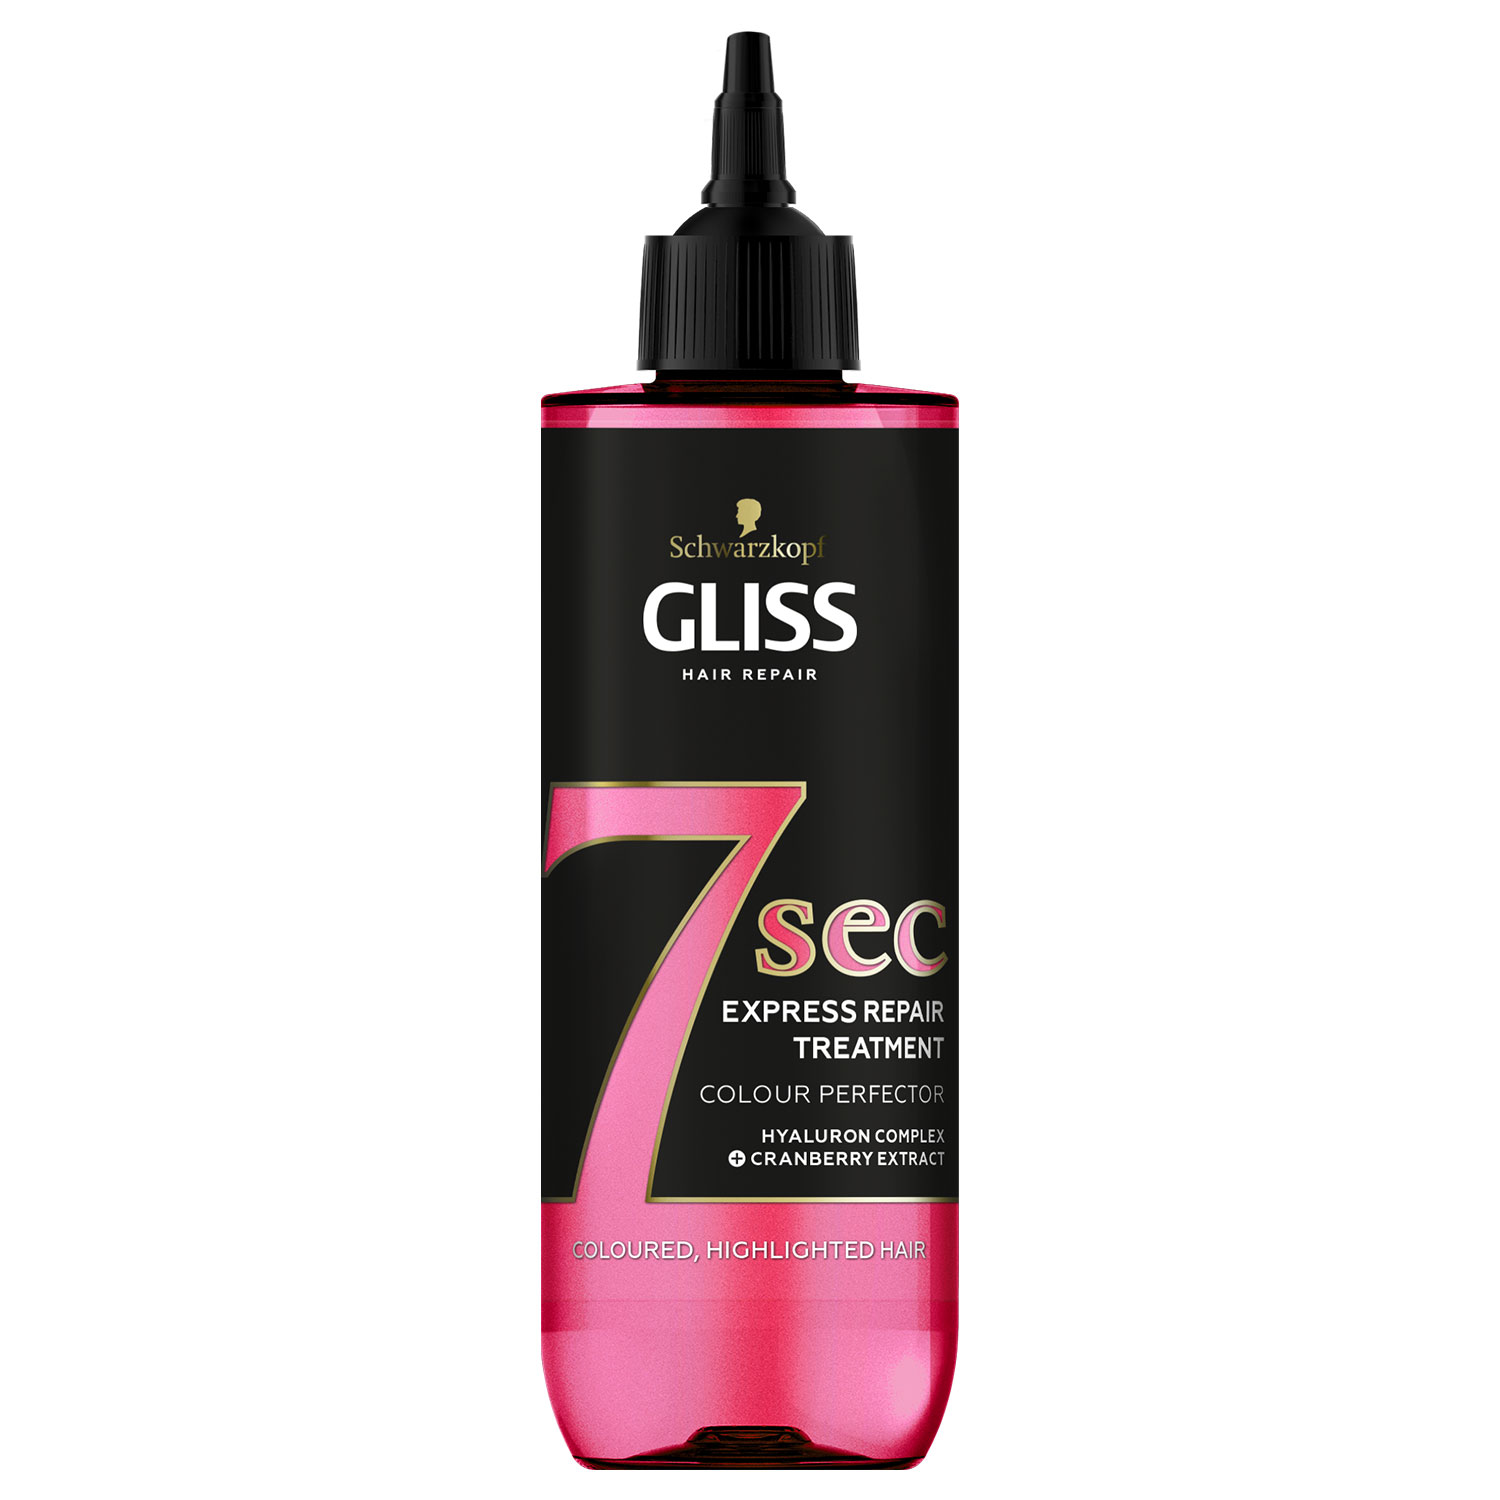 Express-Mask GLISS Color Perfector 7 seconds 200 ml